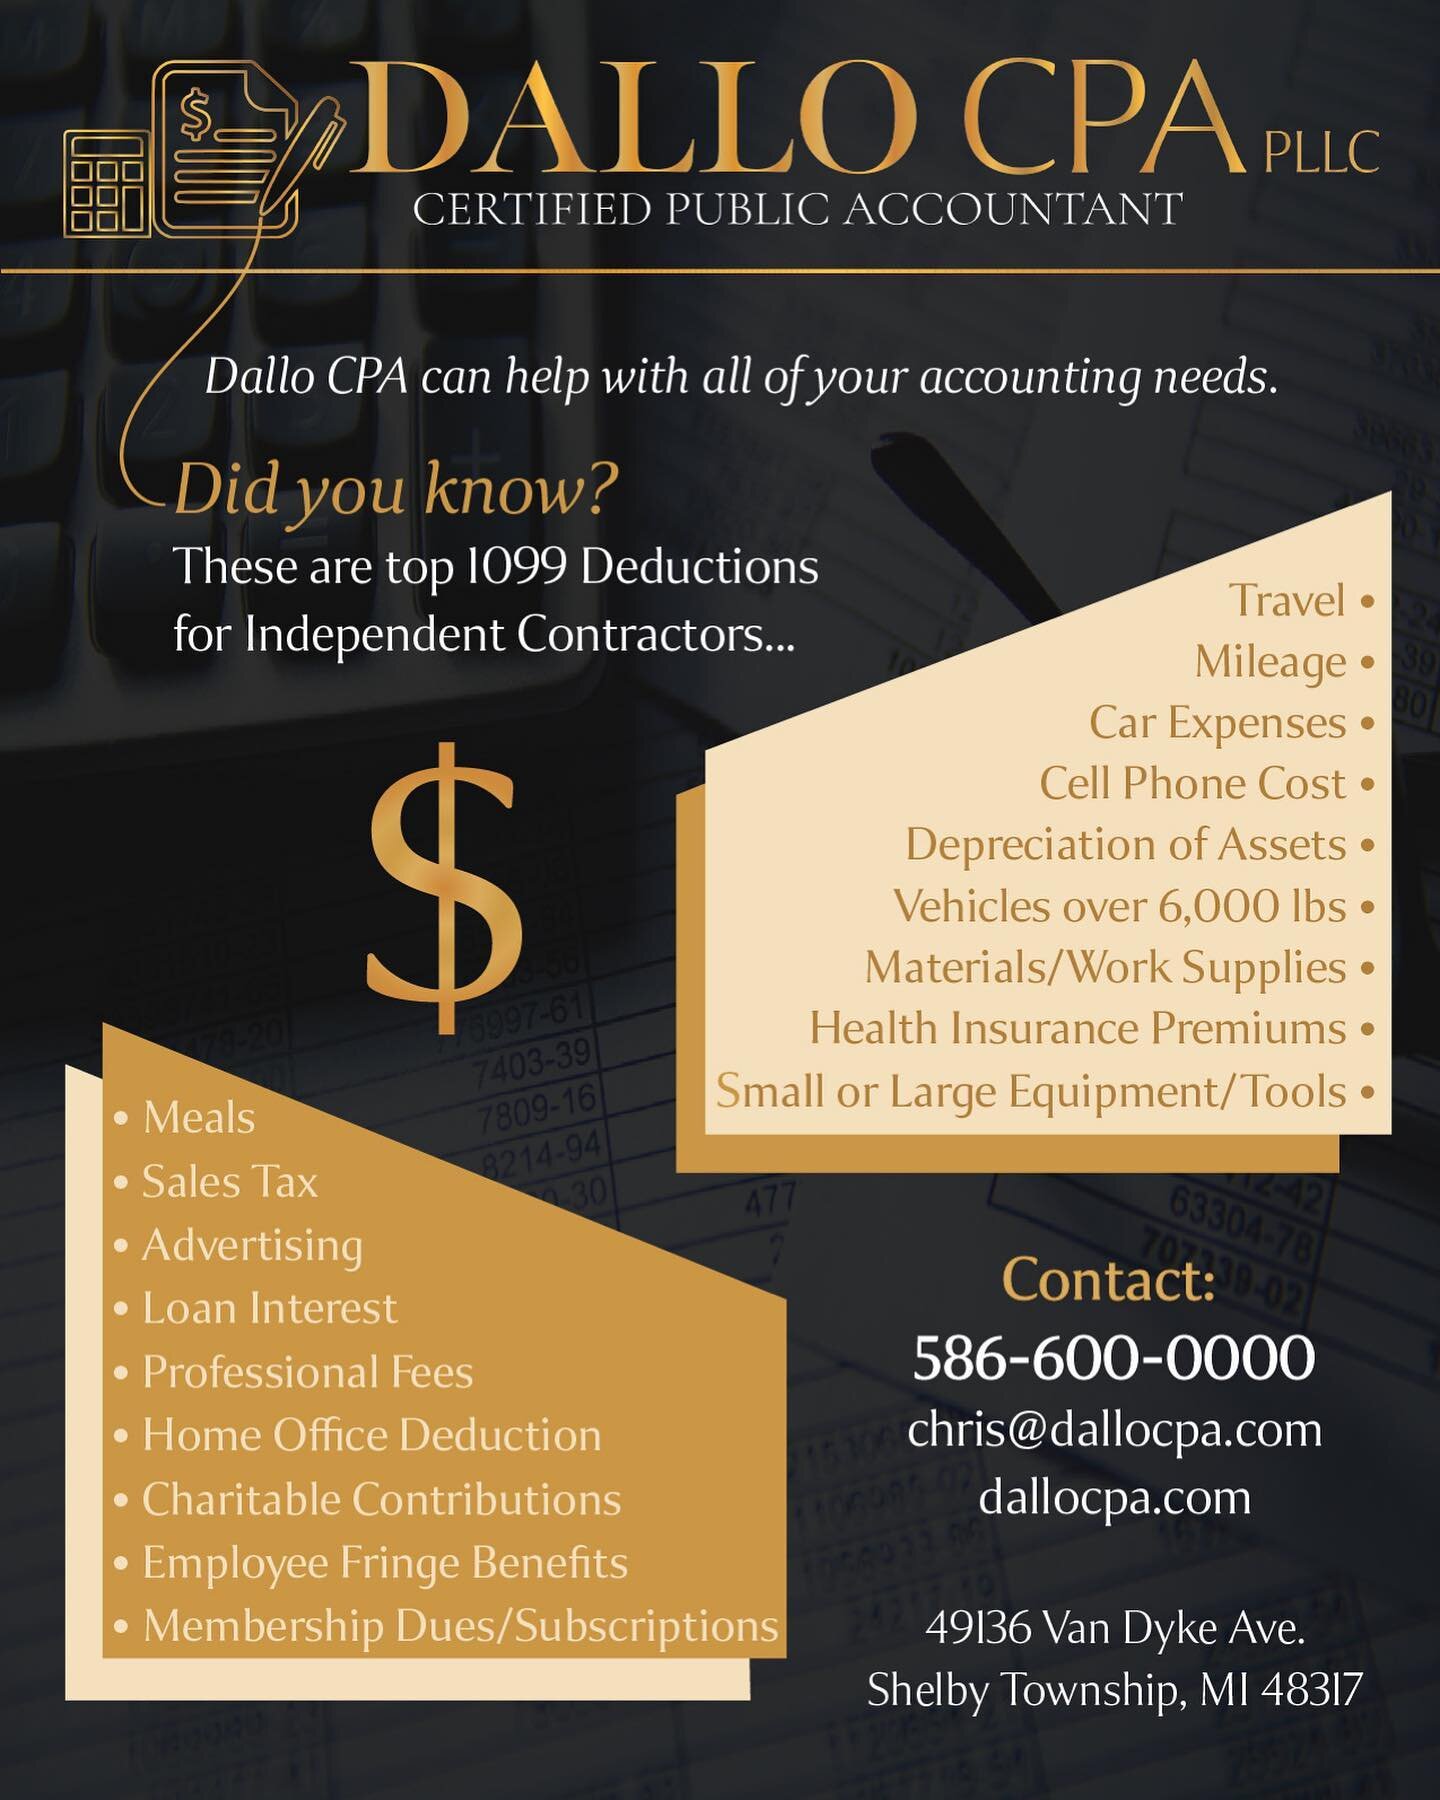 Are you a subcontractor? Take a look at what the most common expenses are for subcontractors!

Designed by @lexgraphex 

#subcontractor #tax #taxtips #taxpreparation #taxseason #dallocpa